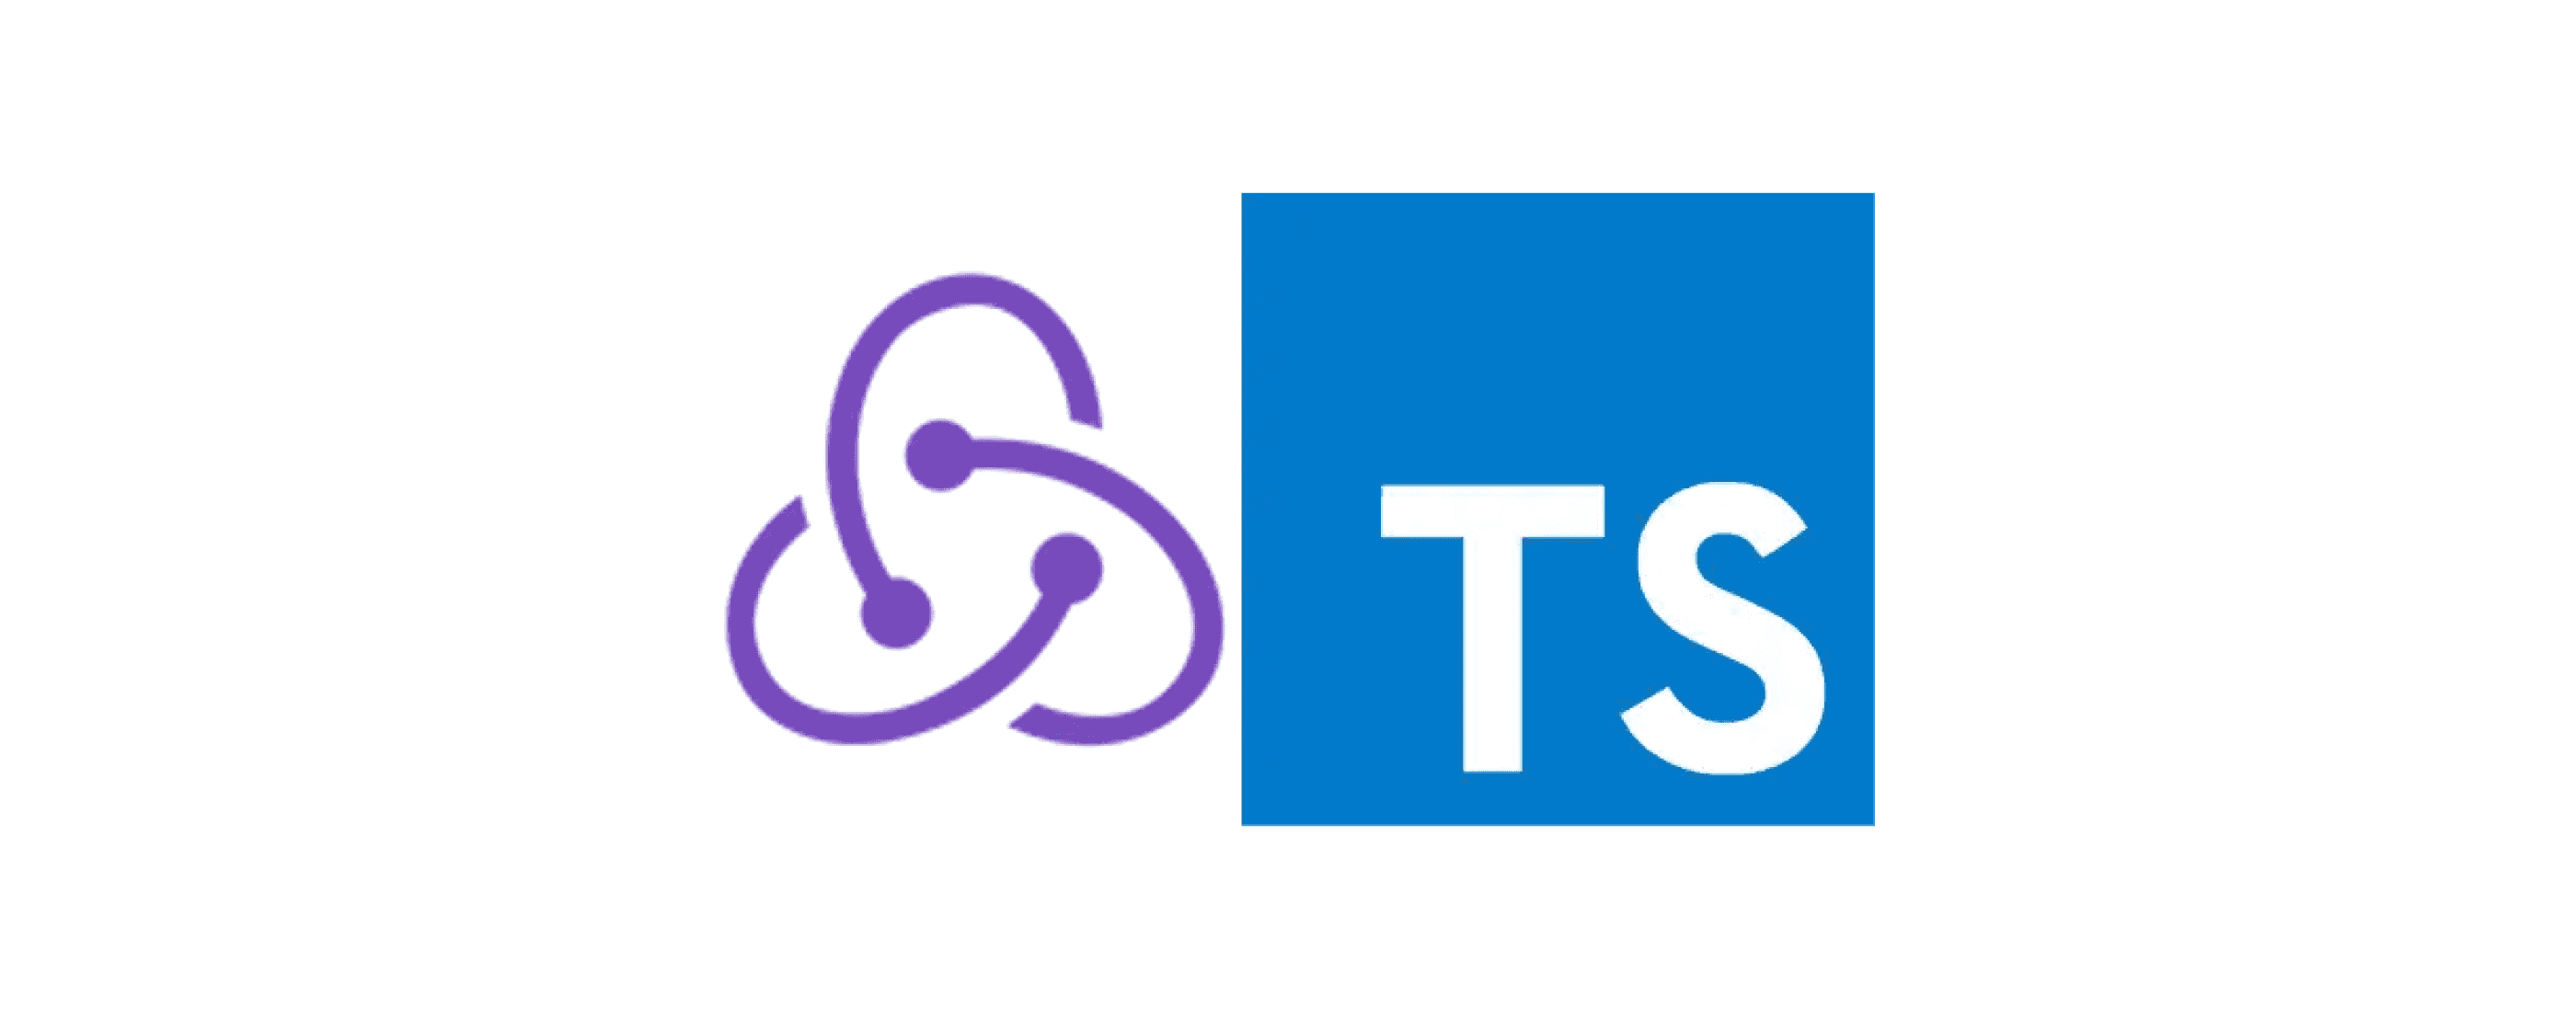 Using TypeScript with Redux